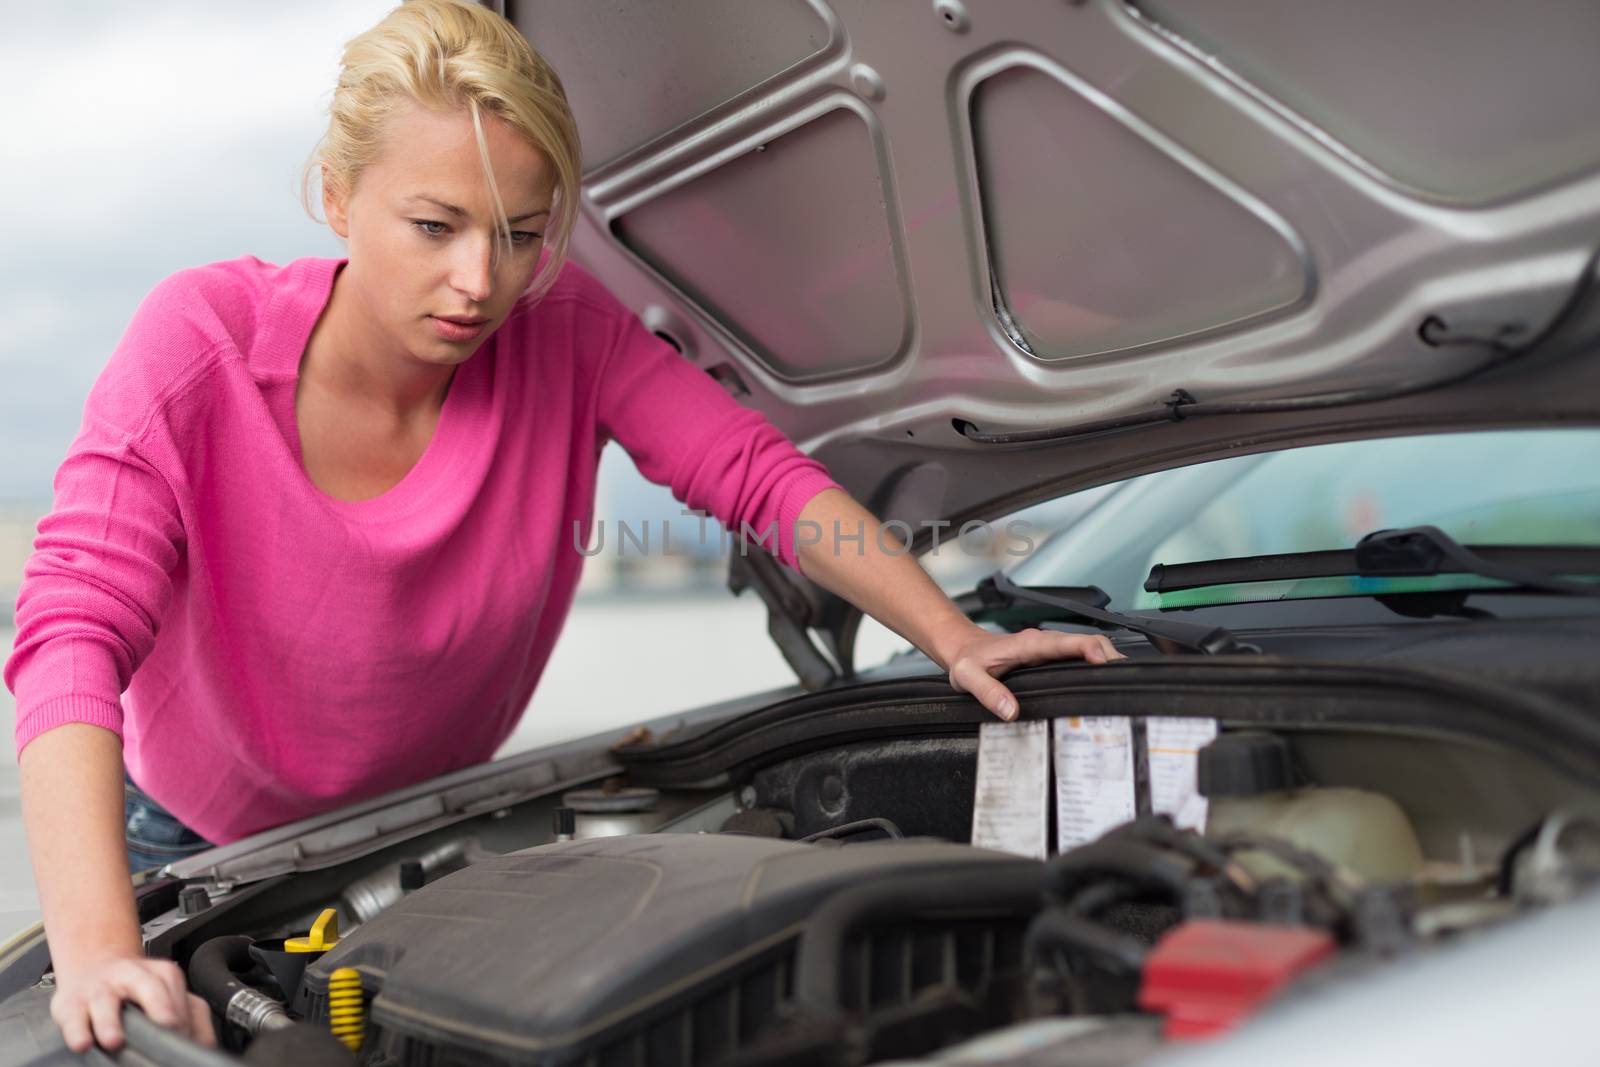 Self-sufficient confident modern young woman inspecting broken car engine.